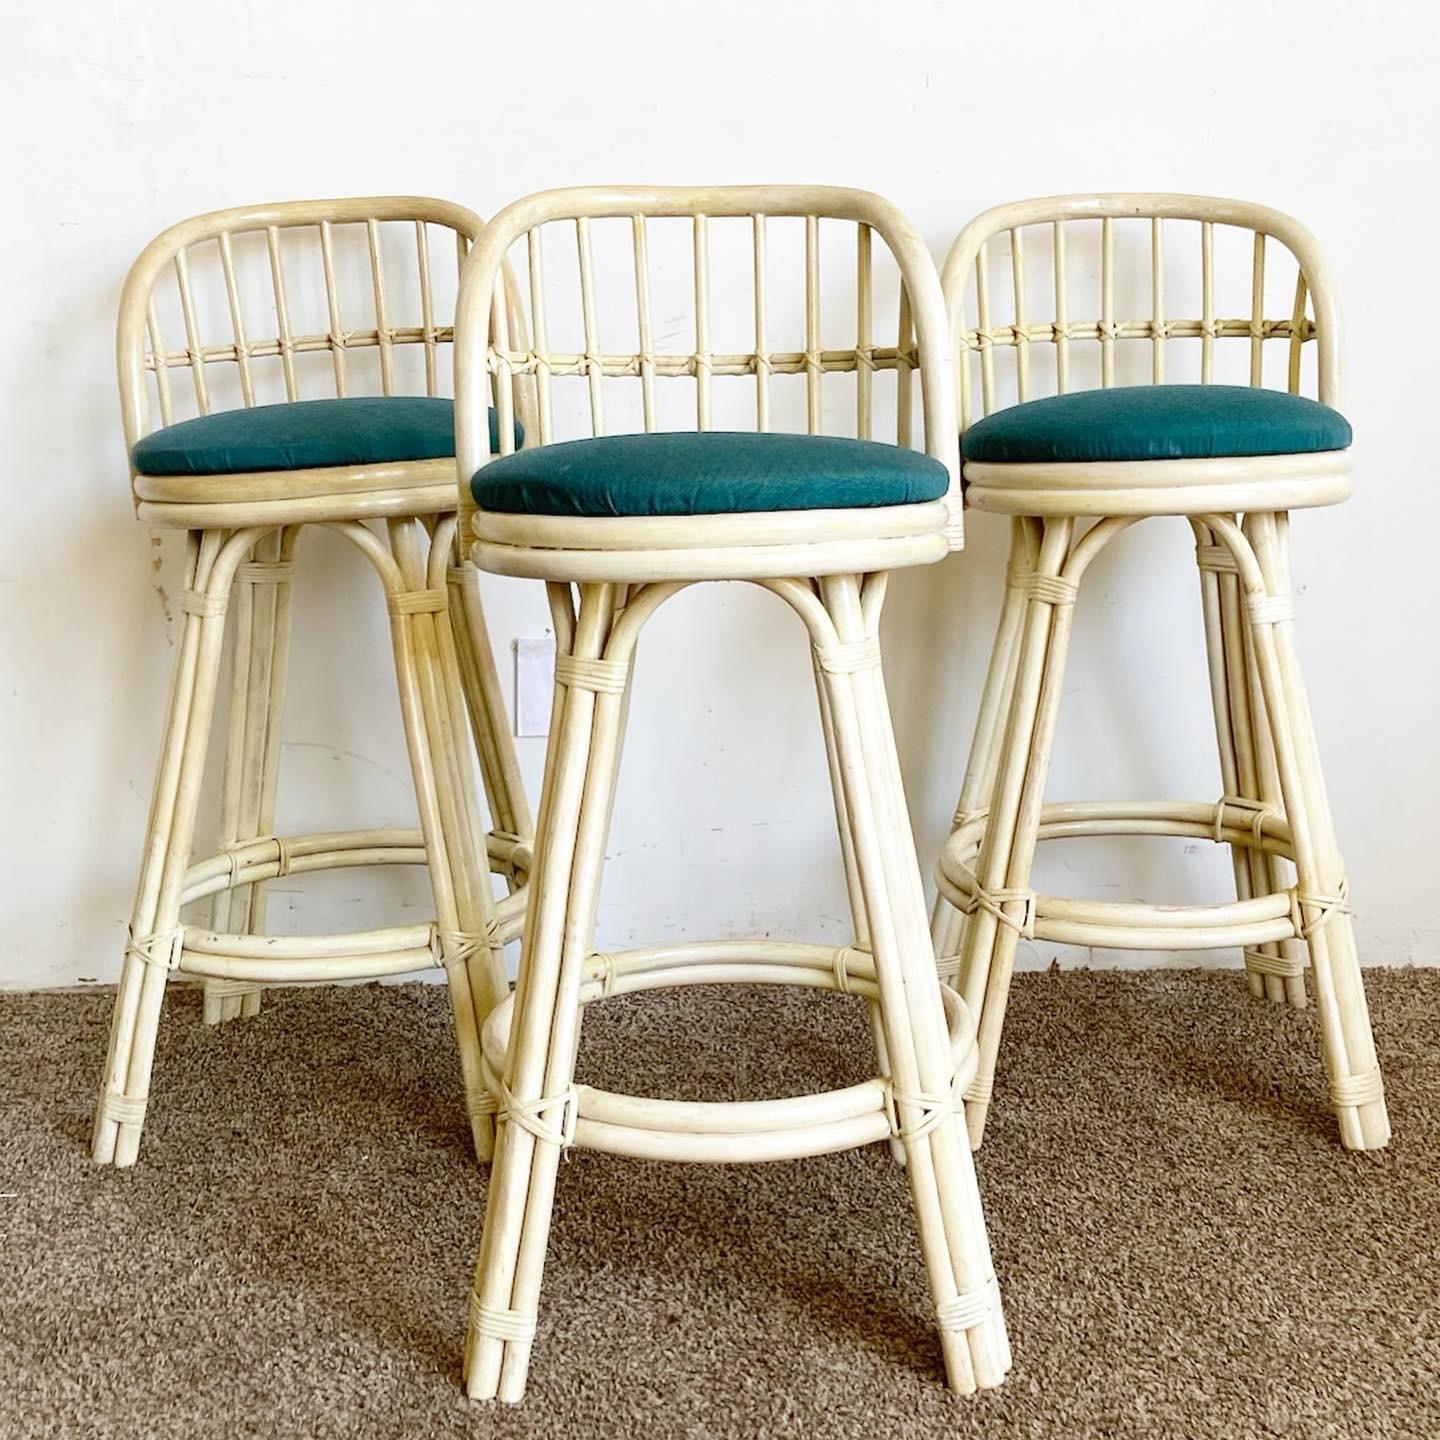 Transform your space with the Boho Chic Cream Finish Bamboo Bar Stools - a set of three. These stylish stools infuse any home bar or kitchen with an airy, bohemian charm.

Boho Chic Style: These stools exude a bohemian charm, effortlessly enhancing